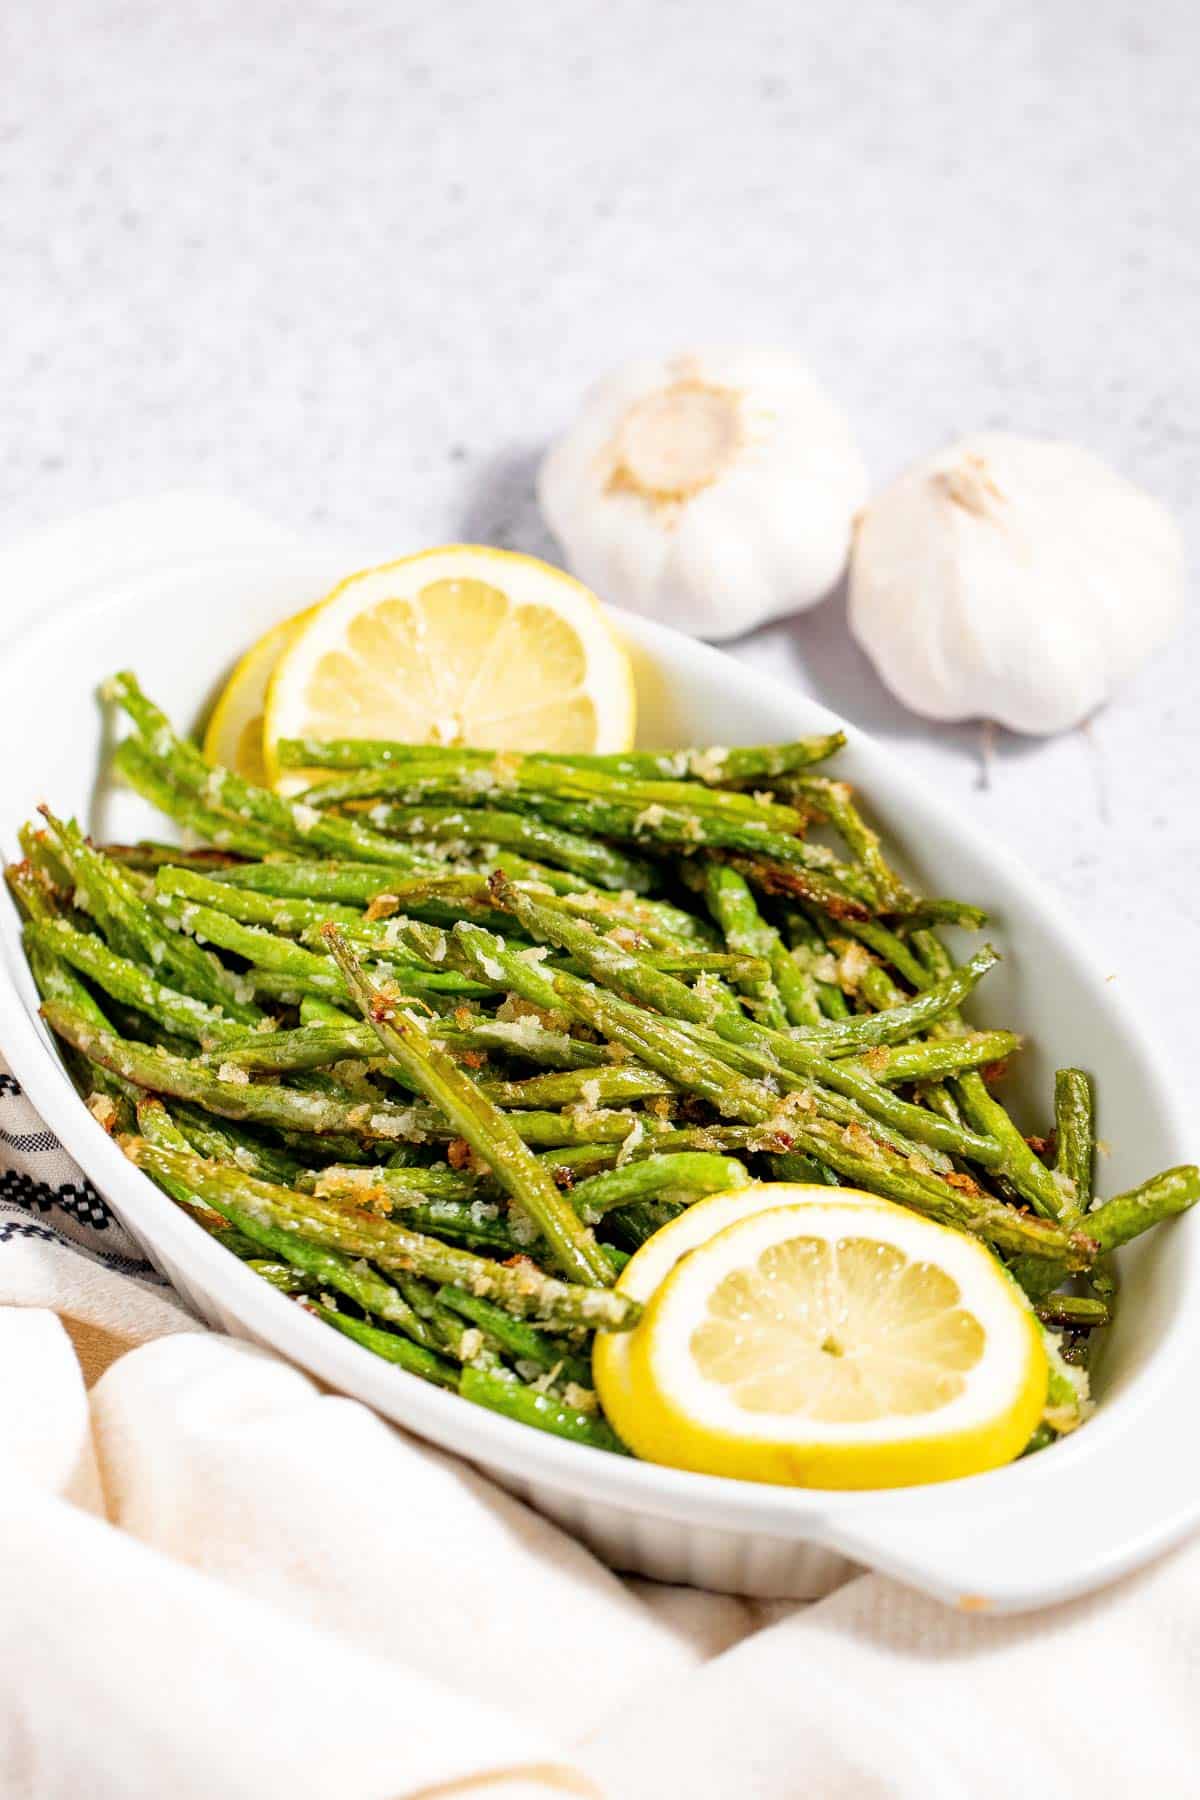 Roasted asparagus with lemon and garlic on a white plate.